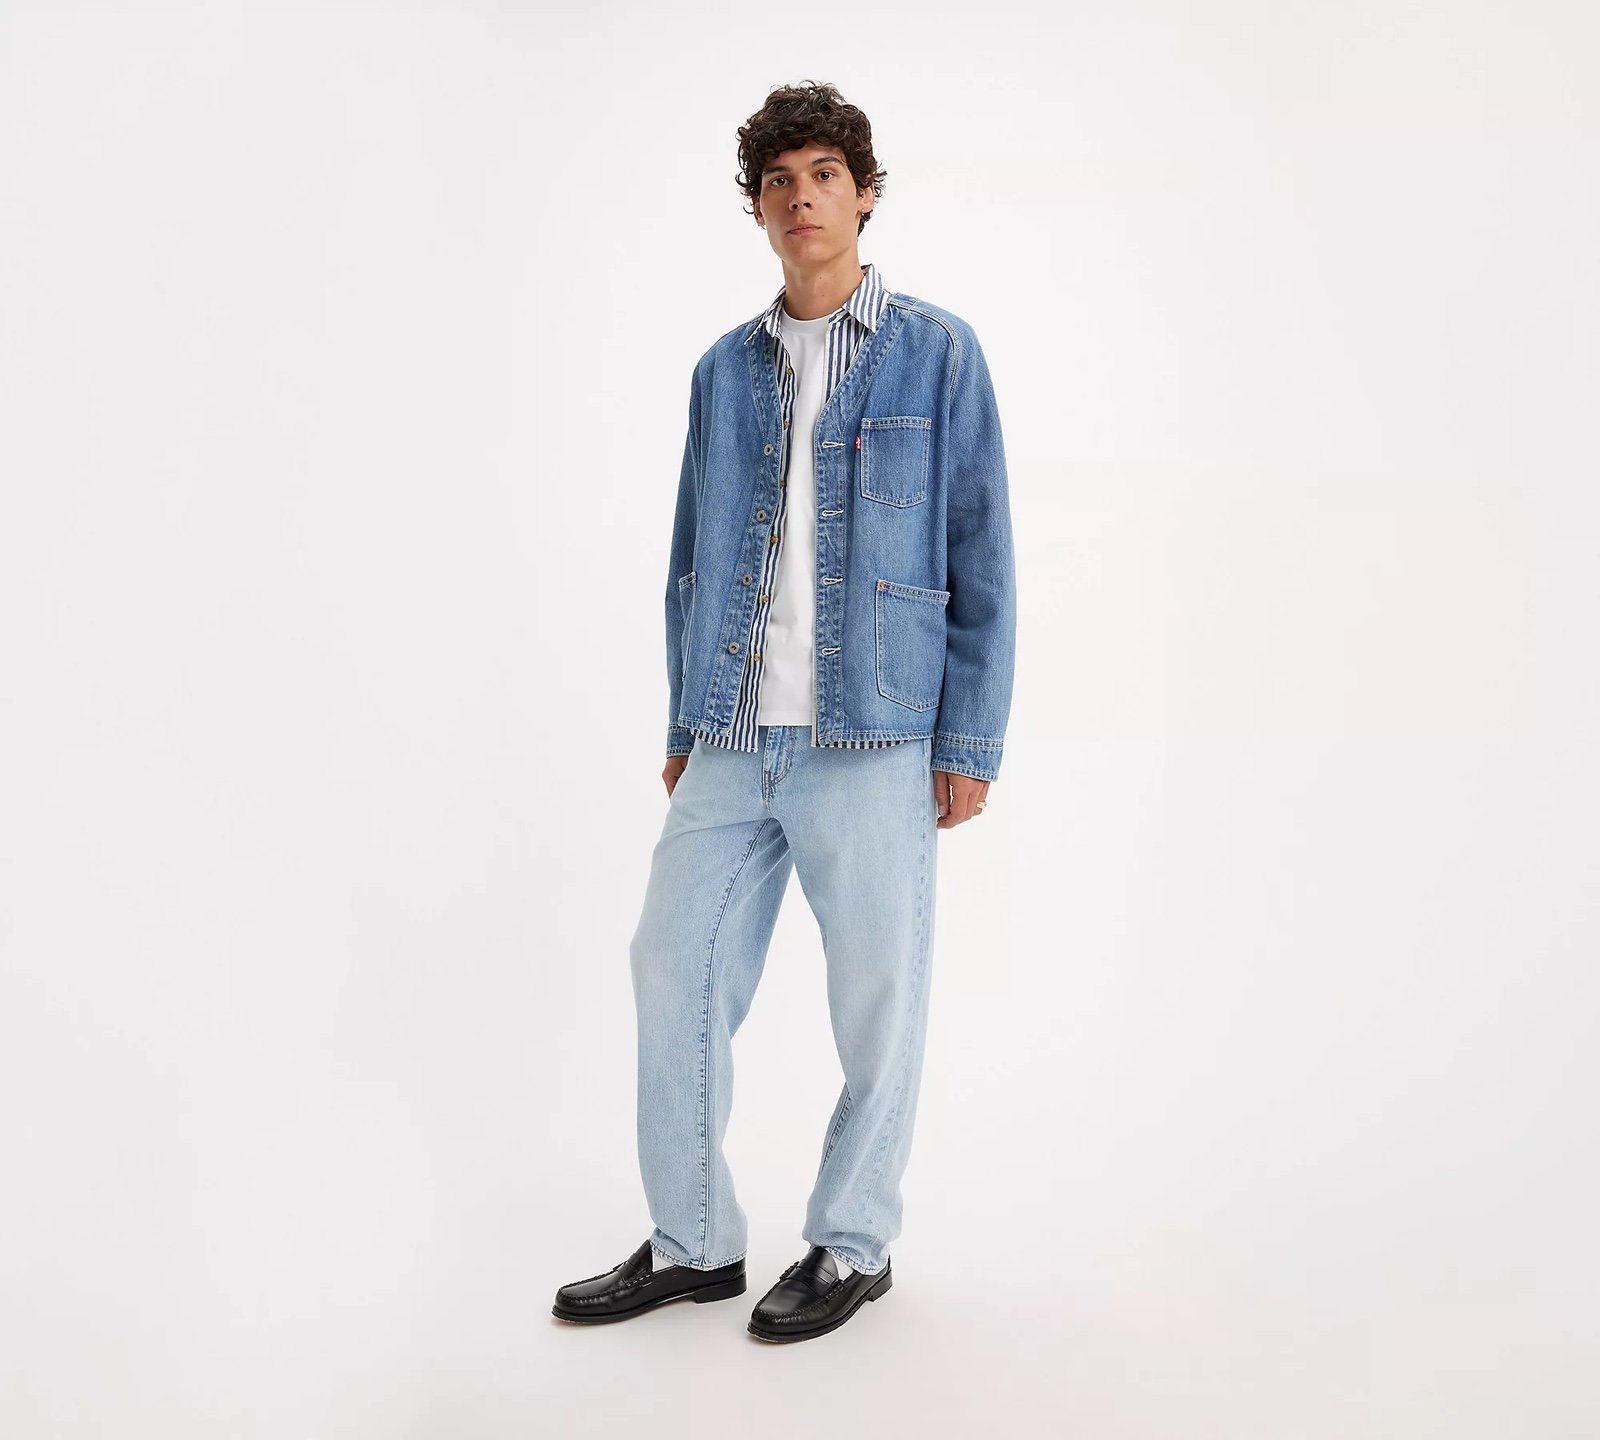 floor price Levi’s 568 stay loose krsnIHNHY online store